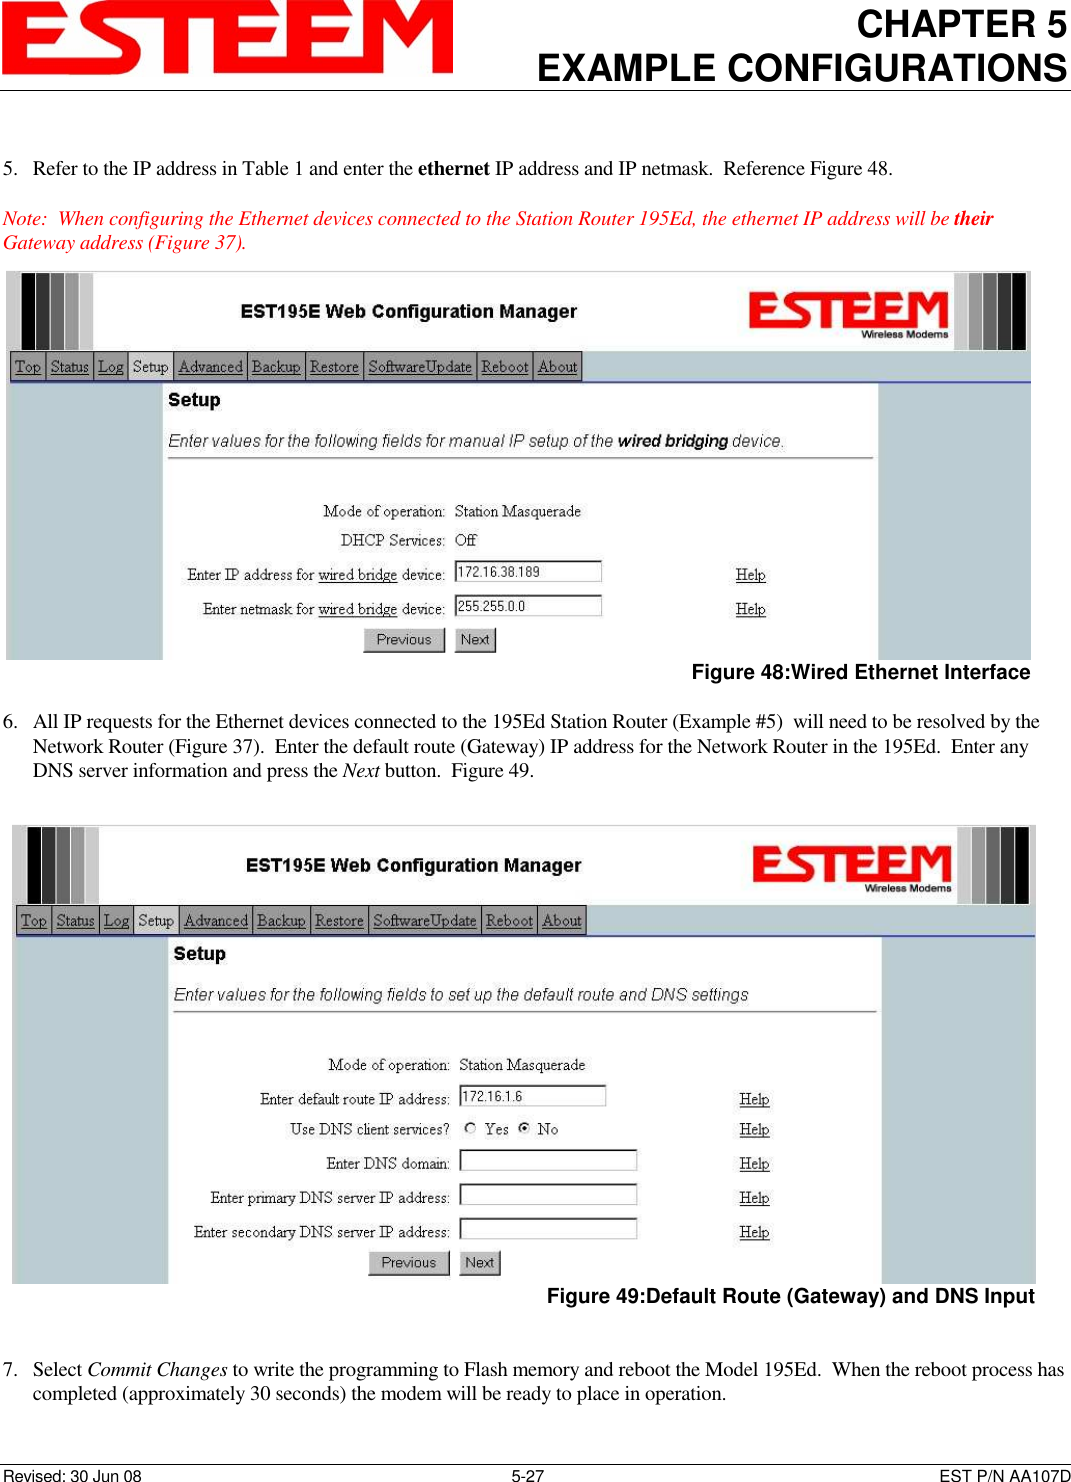 CHAPTER 5 EXAMPLE CONFIGURATIONS    Revised: 30 Jun 08  5-27  EST P/N AA107D  5. Refer to the IP address in Table 1 and enter the ethernet IP address and IP netmask.  Reference Figure 48.  Note:  When configuring the Ethernet devices connected to the Station Router 195Ed, the ethernet IP address will be their Gateway address (Figure 37).  6. All IP requests for the Ethernet devices connected to the 195Ed Station Router (Example #5)  will need to be resolved by the Network Router (Figure 37).  Enter the default route (Gateway) IP address for the Network Router in the 195Ed.  Enter any DNS server information and press the Next button.  Figure 49.   7. Select Commit Changes to write the programming to Flash memory and reboot the Model 195Ed.  When the reboot process has completed (approximately 30 seconds) the modem will be ready to place in operation.  Figure 48:Wired Ethernet Interface  Figure 49:Default Route (Gateway) and DNS Input  